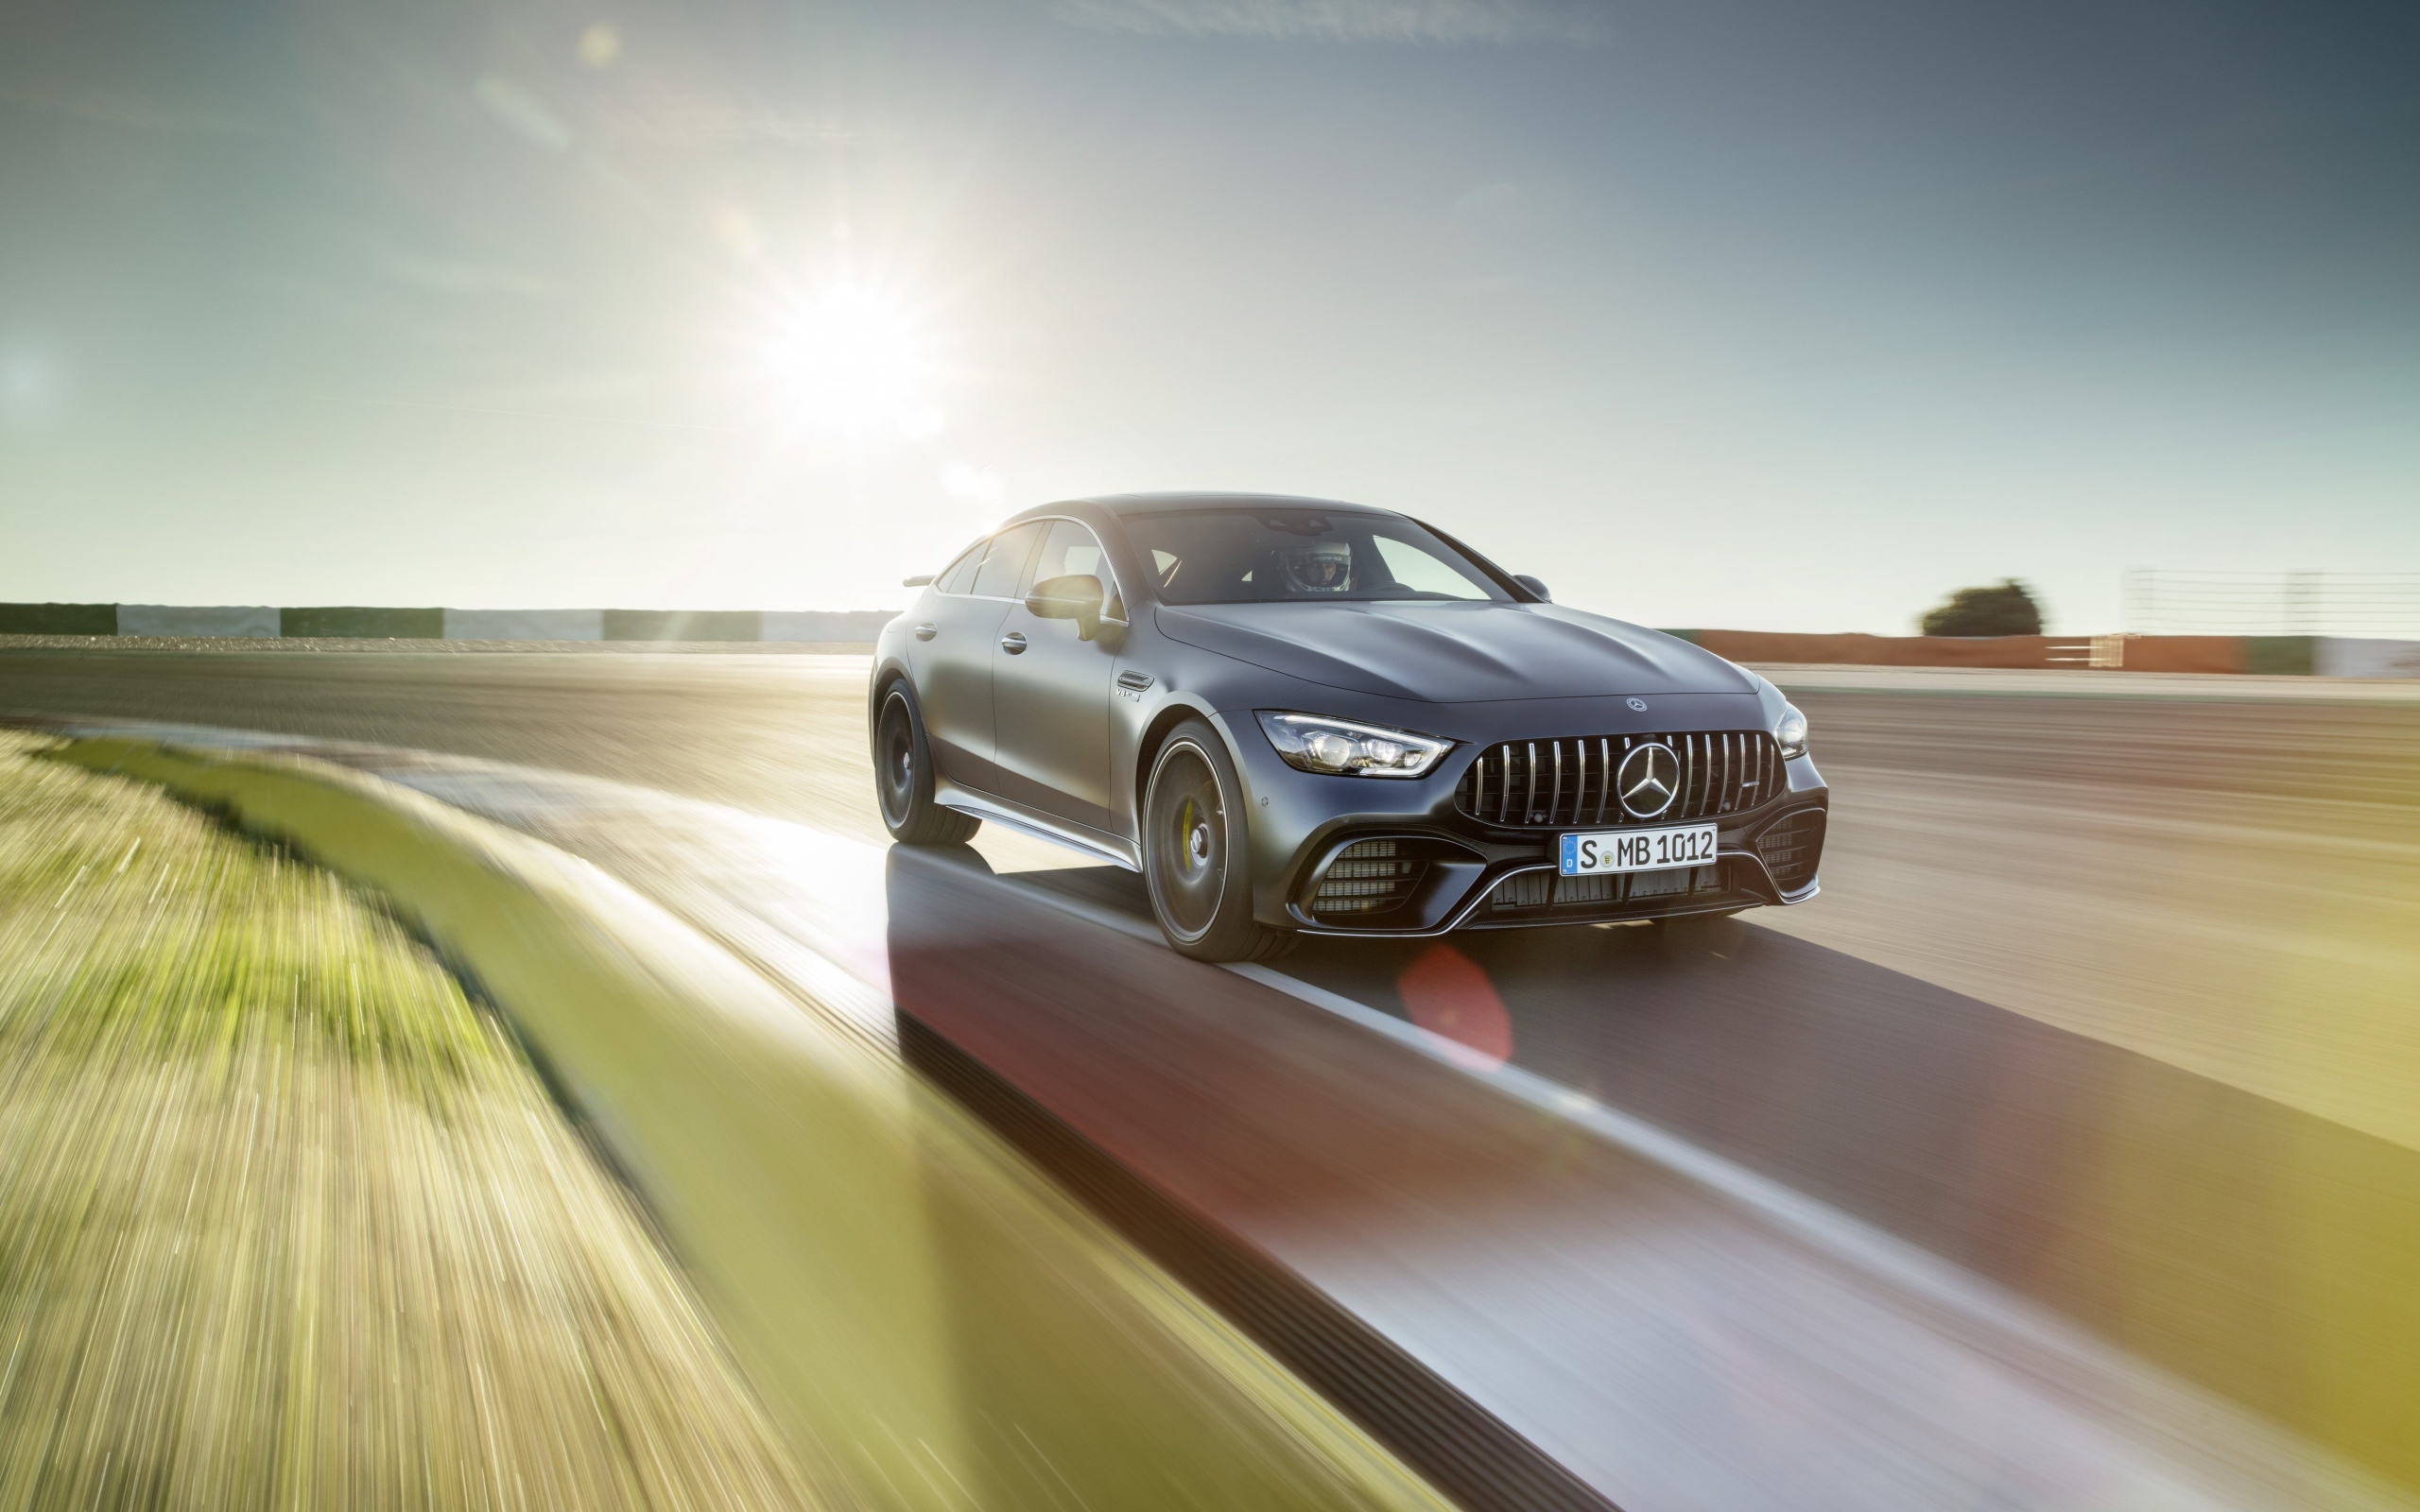 Silver car Mercedes-AMG GT4, 2018 at speed